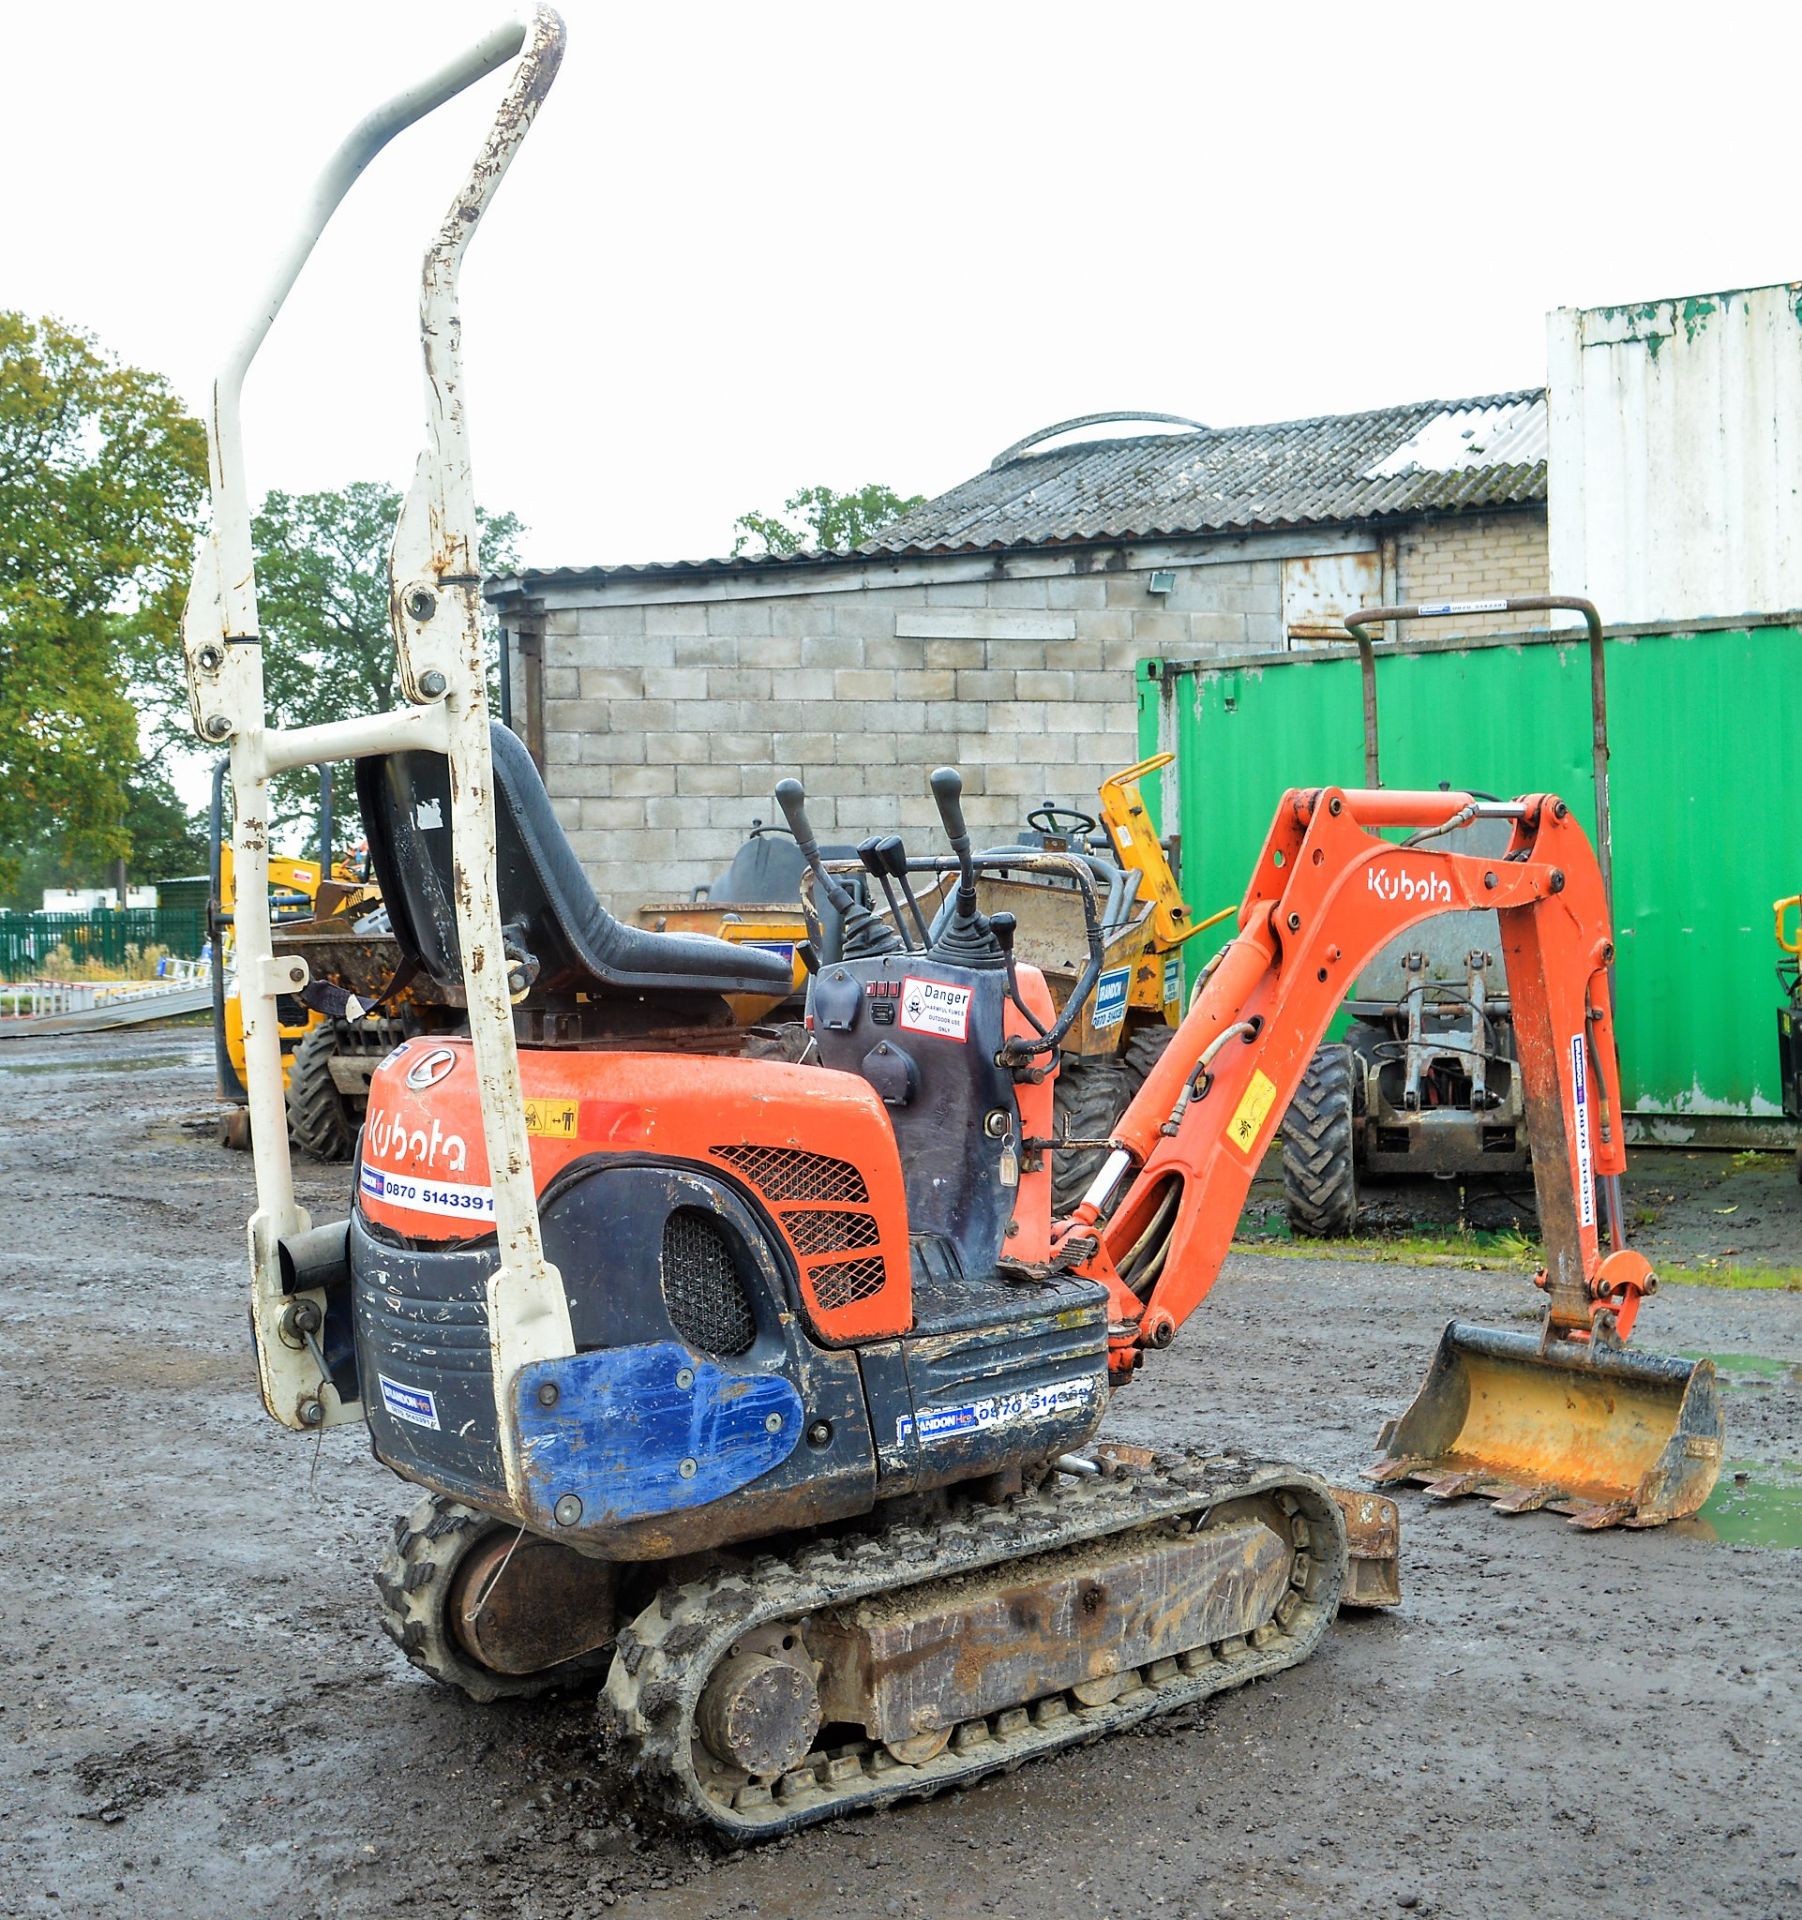 Kubota KX008-3 850 kg rubber tracked micro excavator Year: 2004 S/N: 12445 Recorded Hours: 4414 - Image 3 of 10